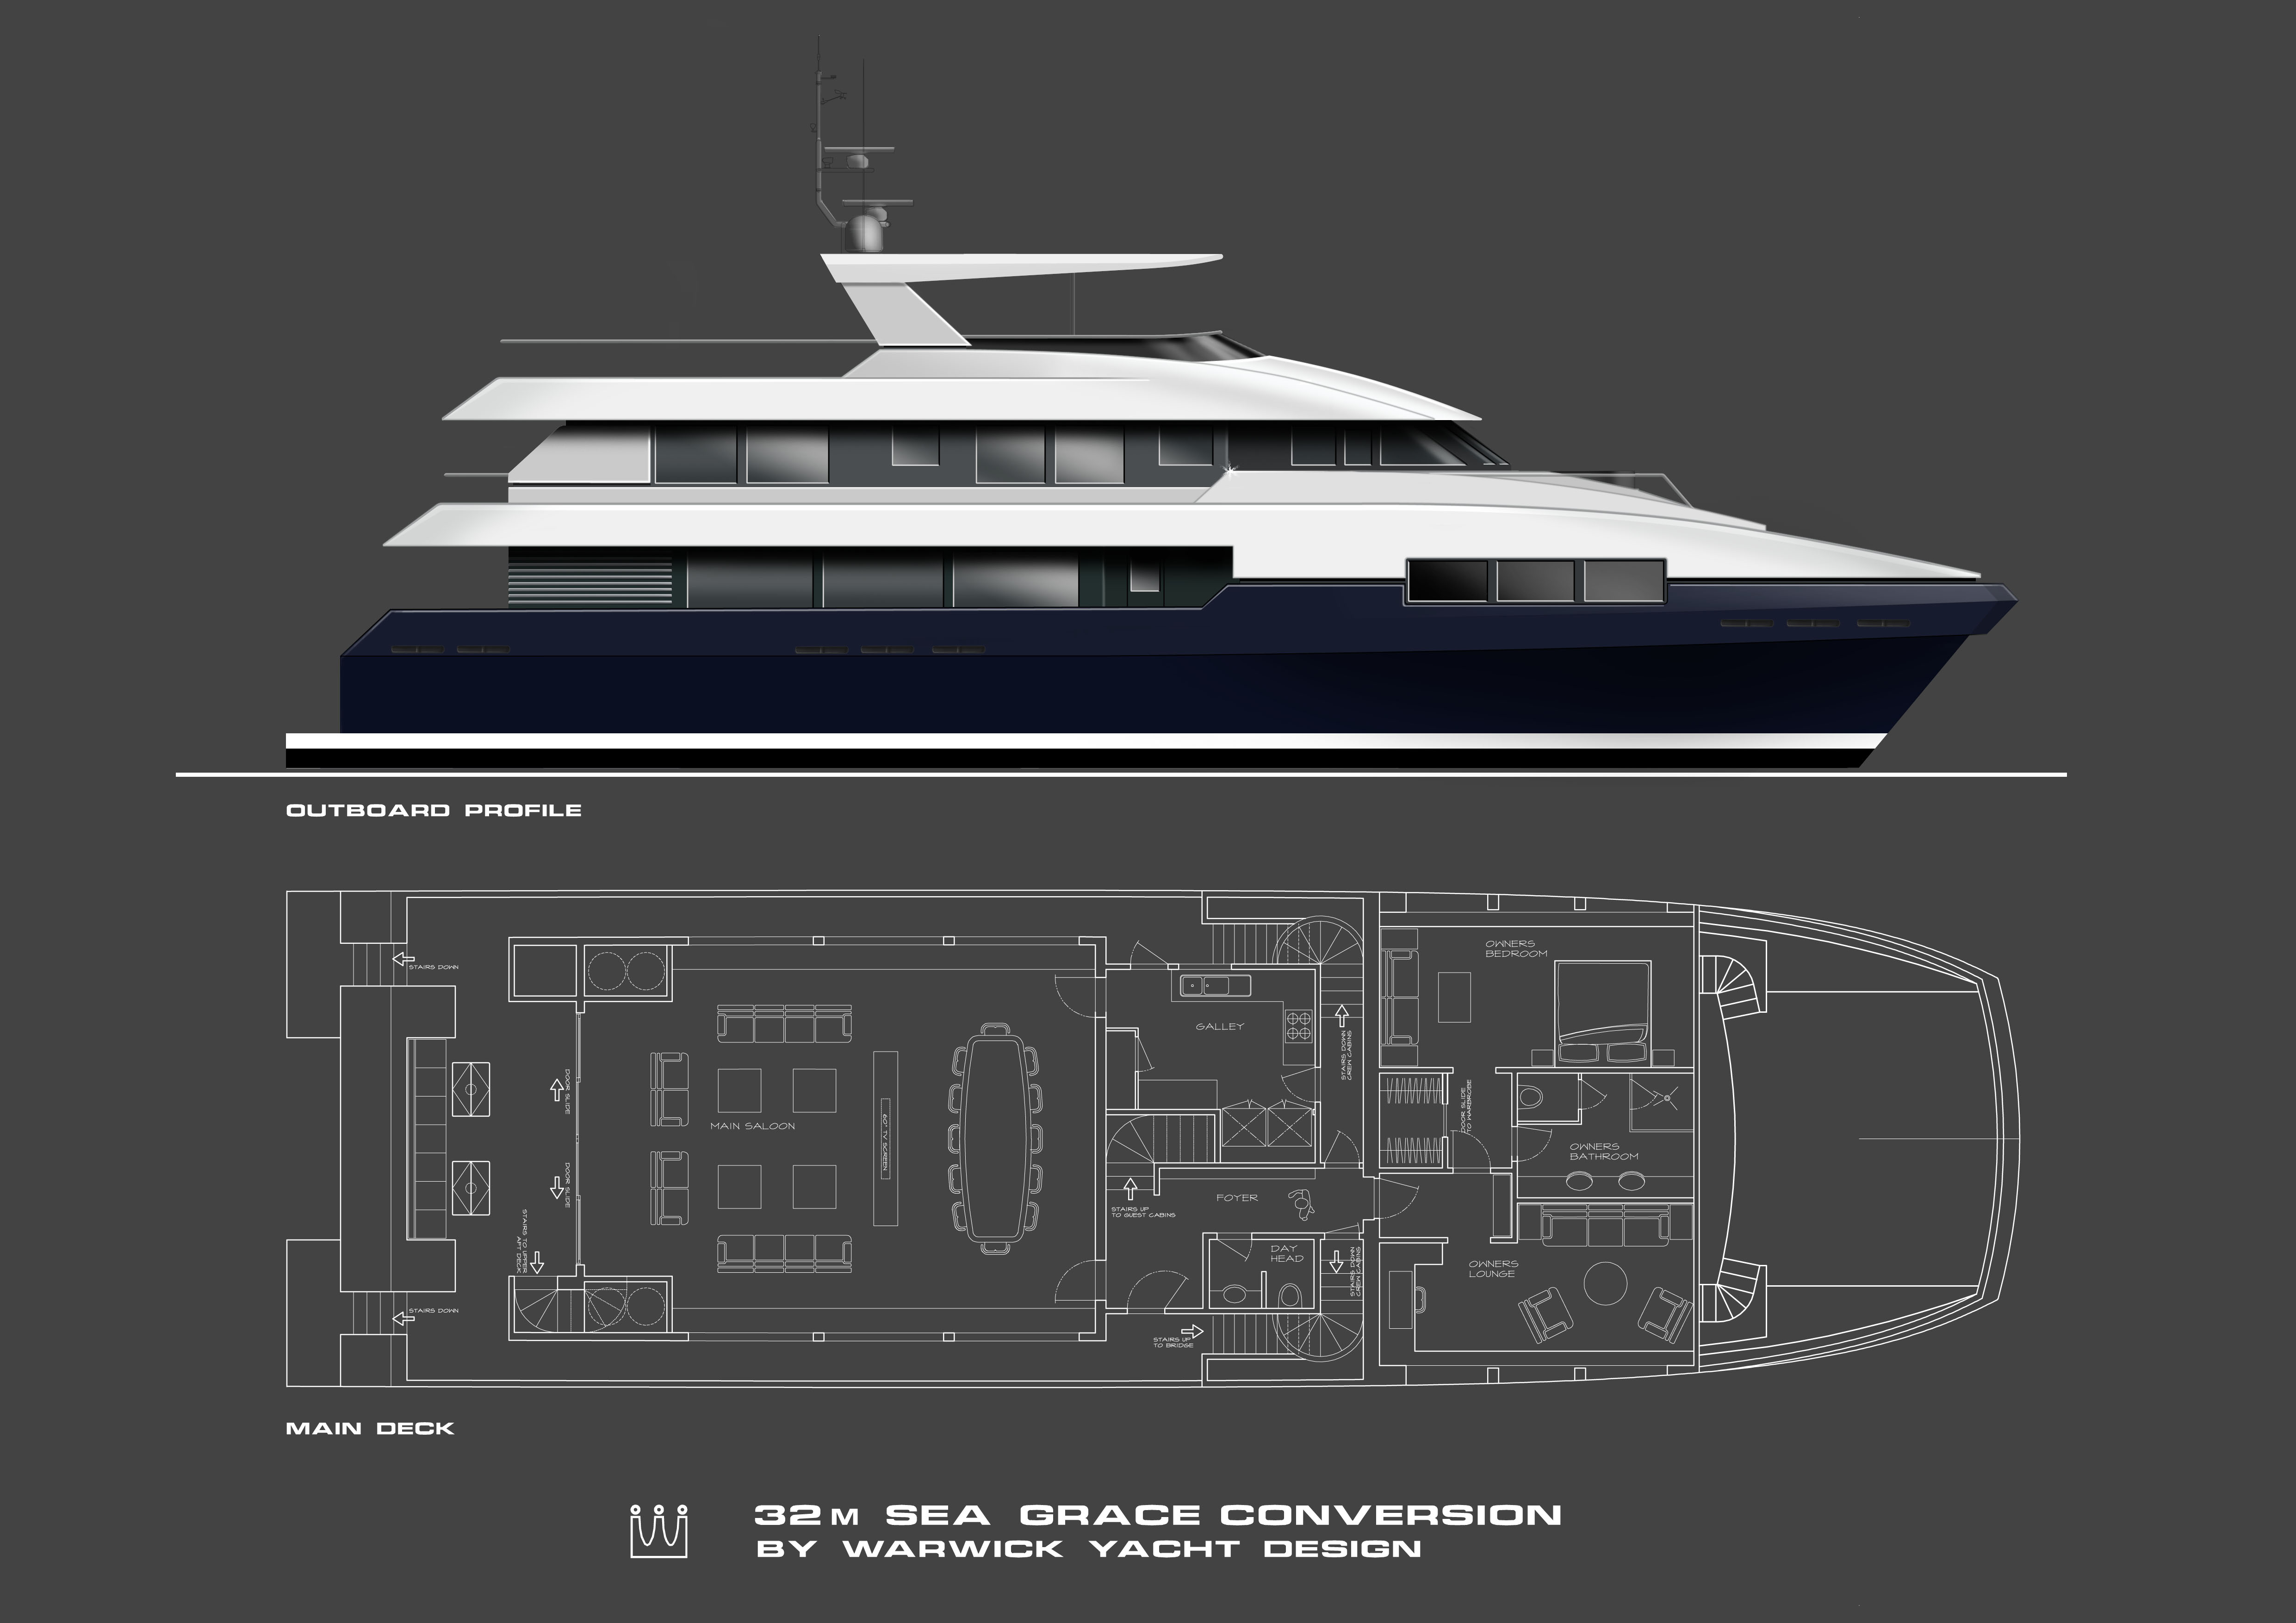 W32 Outboard Profile & Main Deck (Blue Hull)